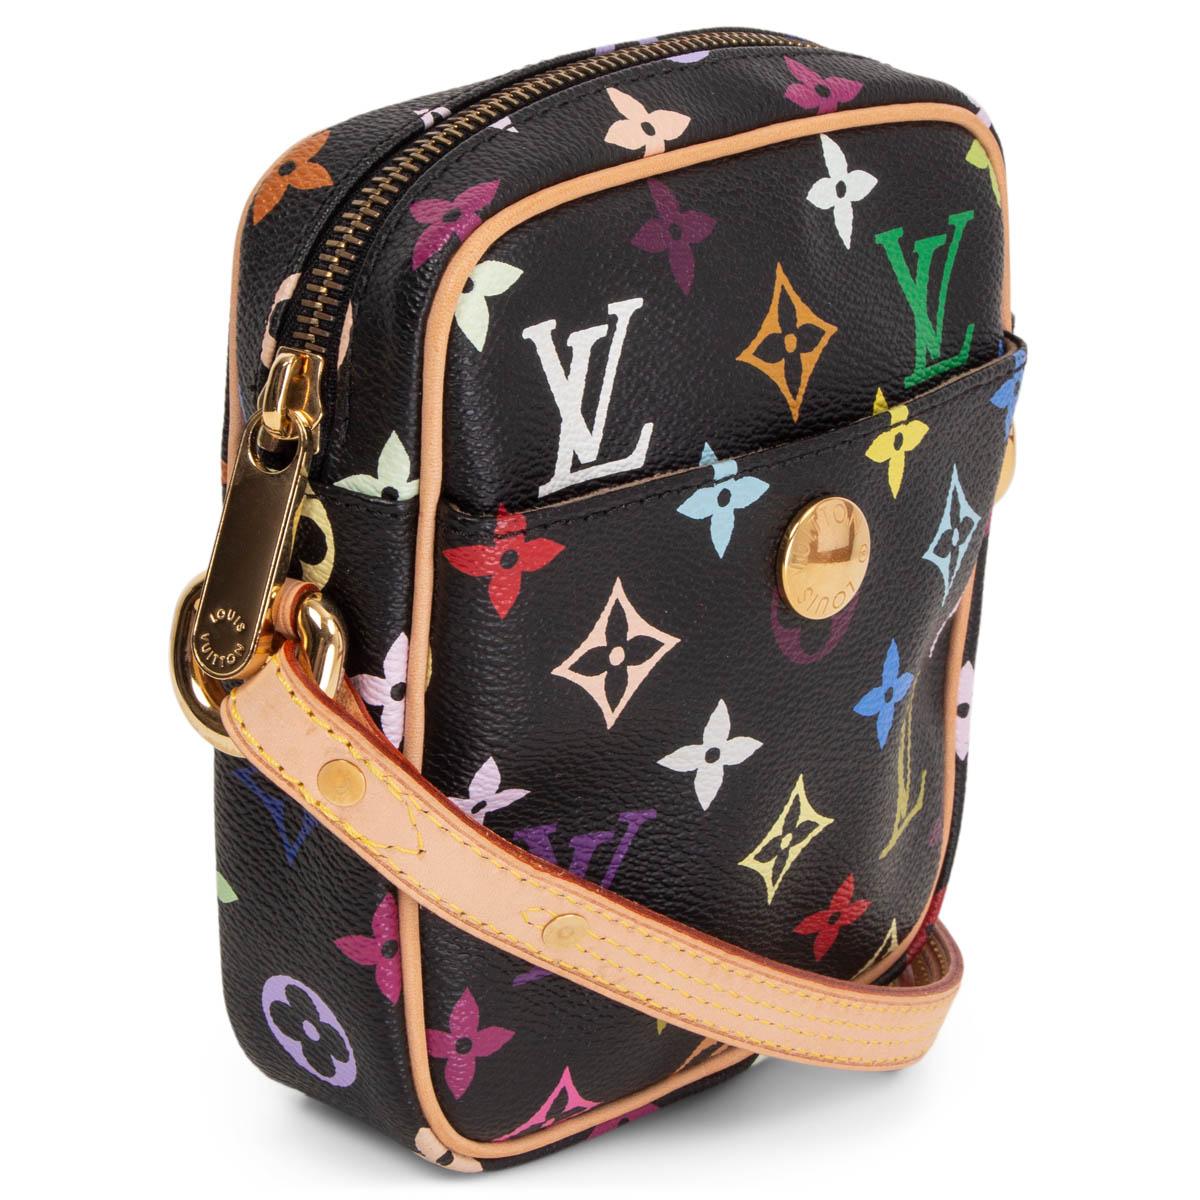 100% authentic Louis Vuitton Rift Crossbody bag in black and multicolor monogram canvas featuring natural cowhide trim and adjustable shoulder strap. Has one front snap pocket and features gold-tone hardware. Opens with a zipper on top and is lined